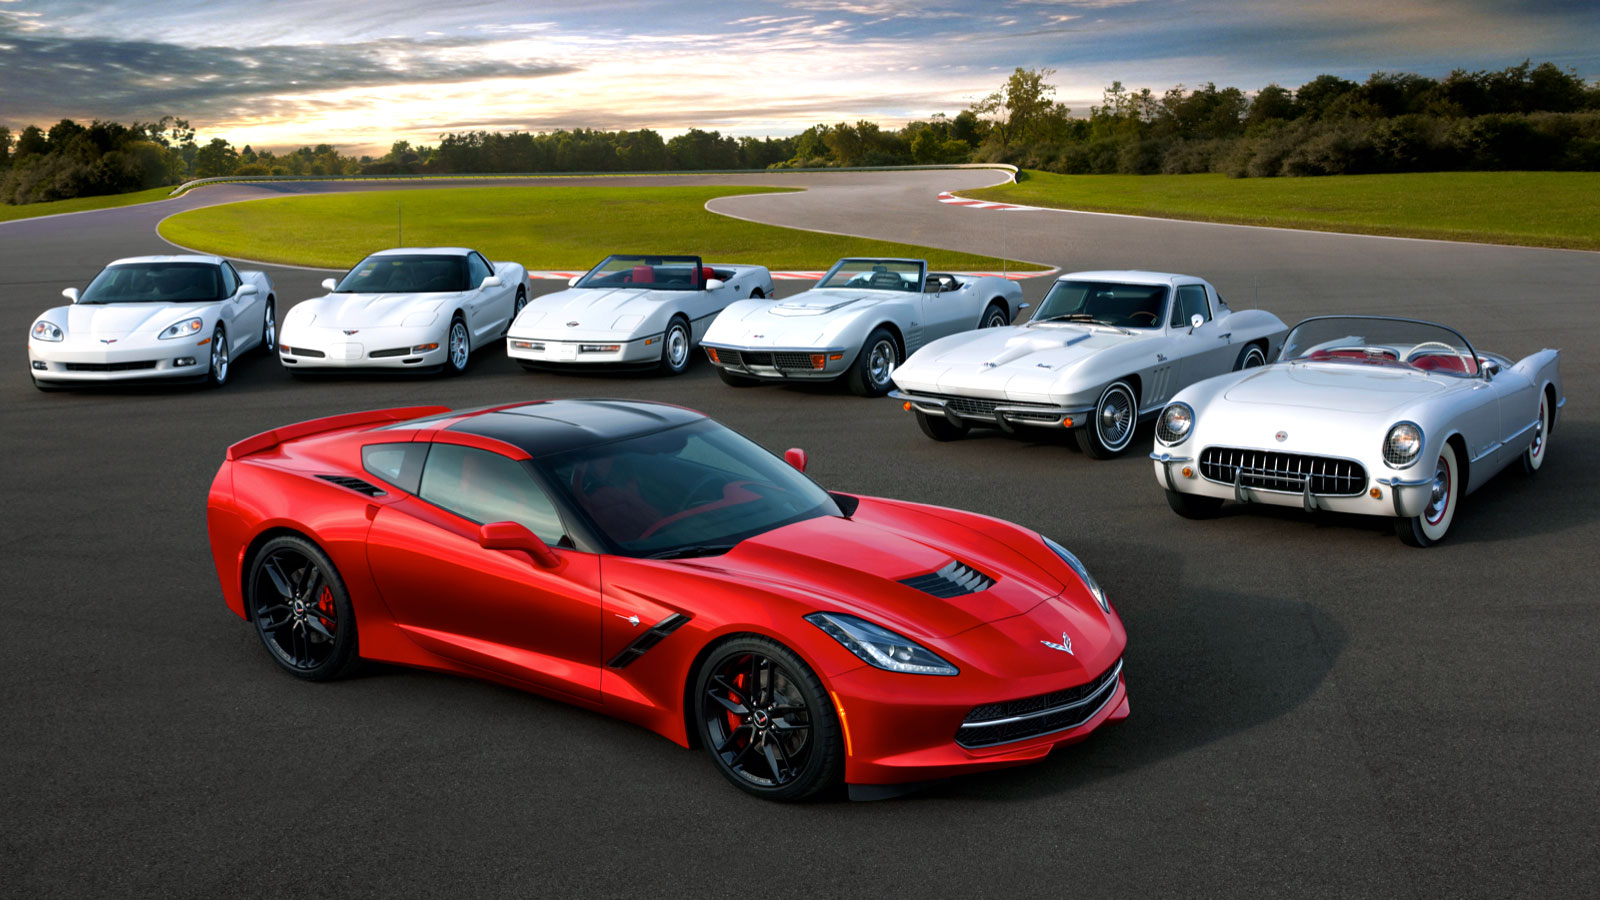 Jakes Car World Chevy Introduces The All New 2014 Corvette Stingray